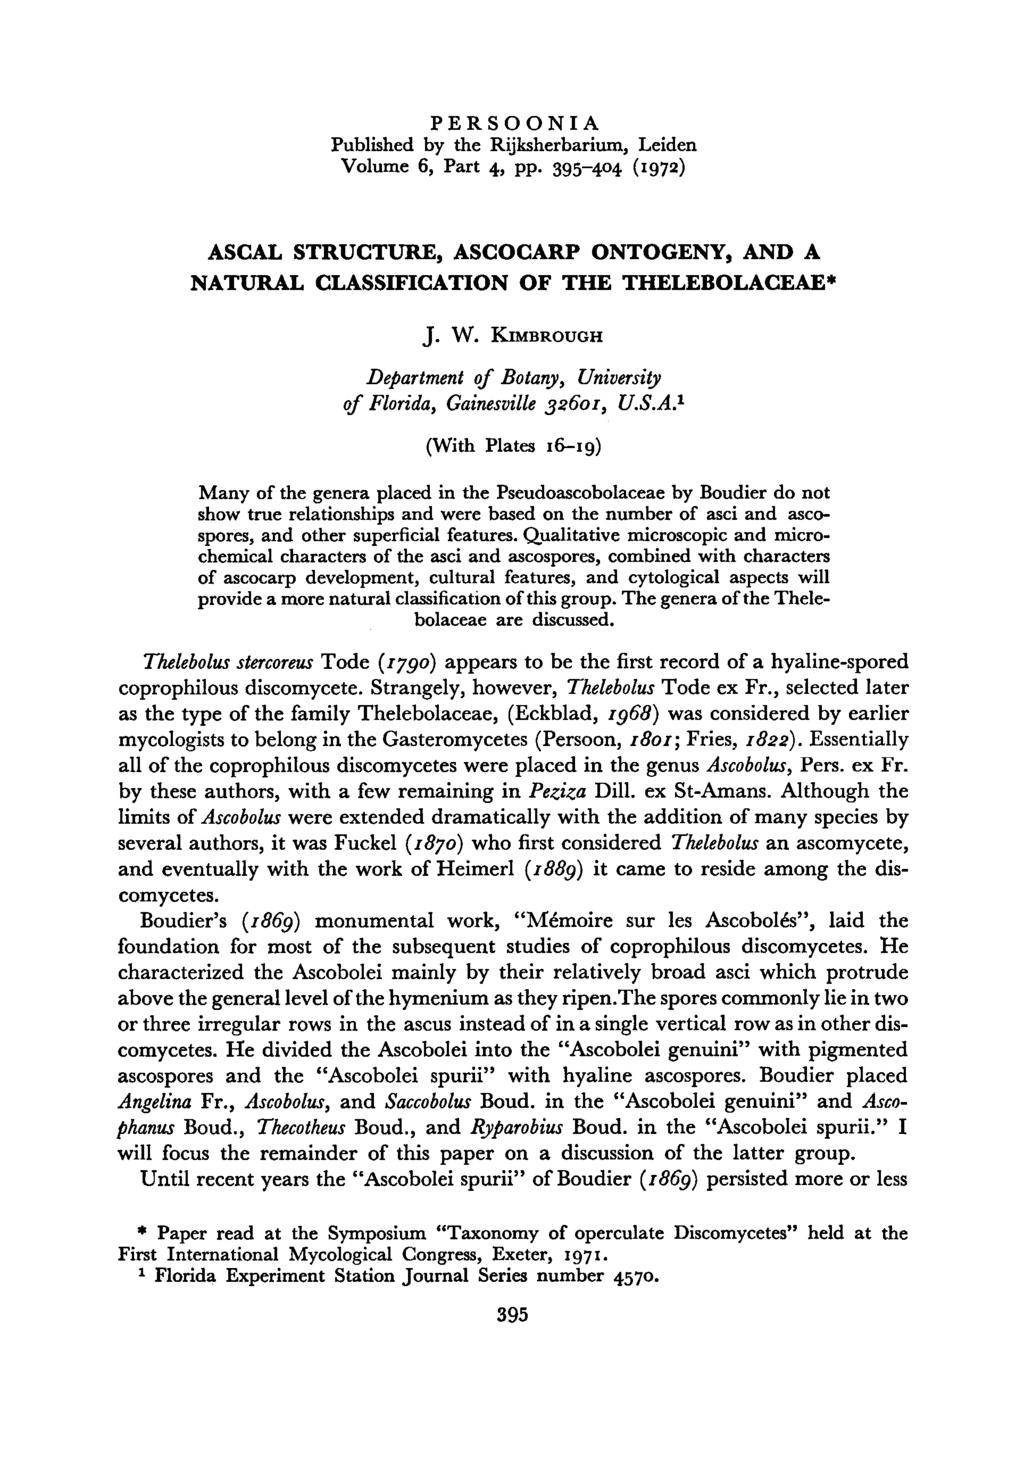 PERSOONIA Published by the Rijksherbarium, Leiden Volume 6, Part 4, pp. 395-404 (1972) Ascal structure, ascocarp ontogeny, and a natural classification of the Thelebolaceae J. W.